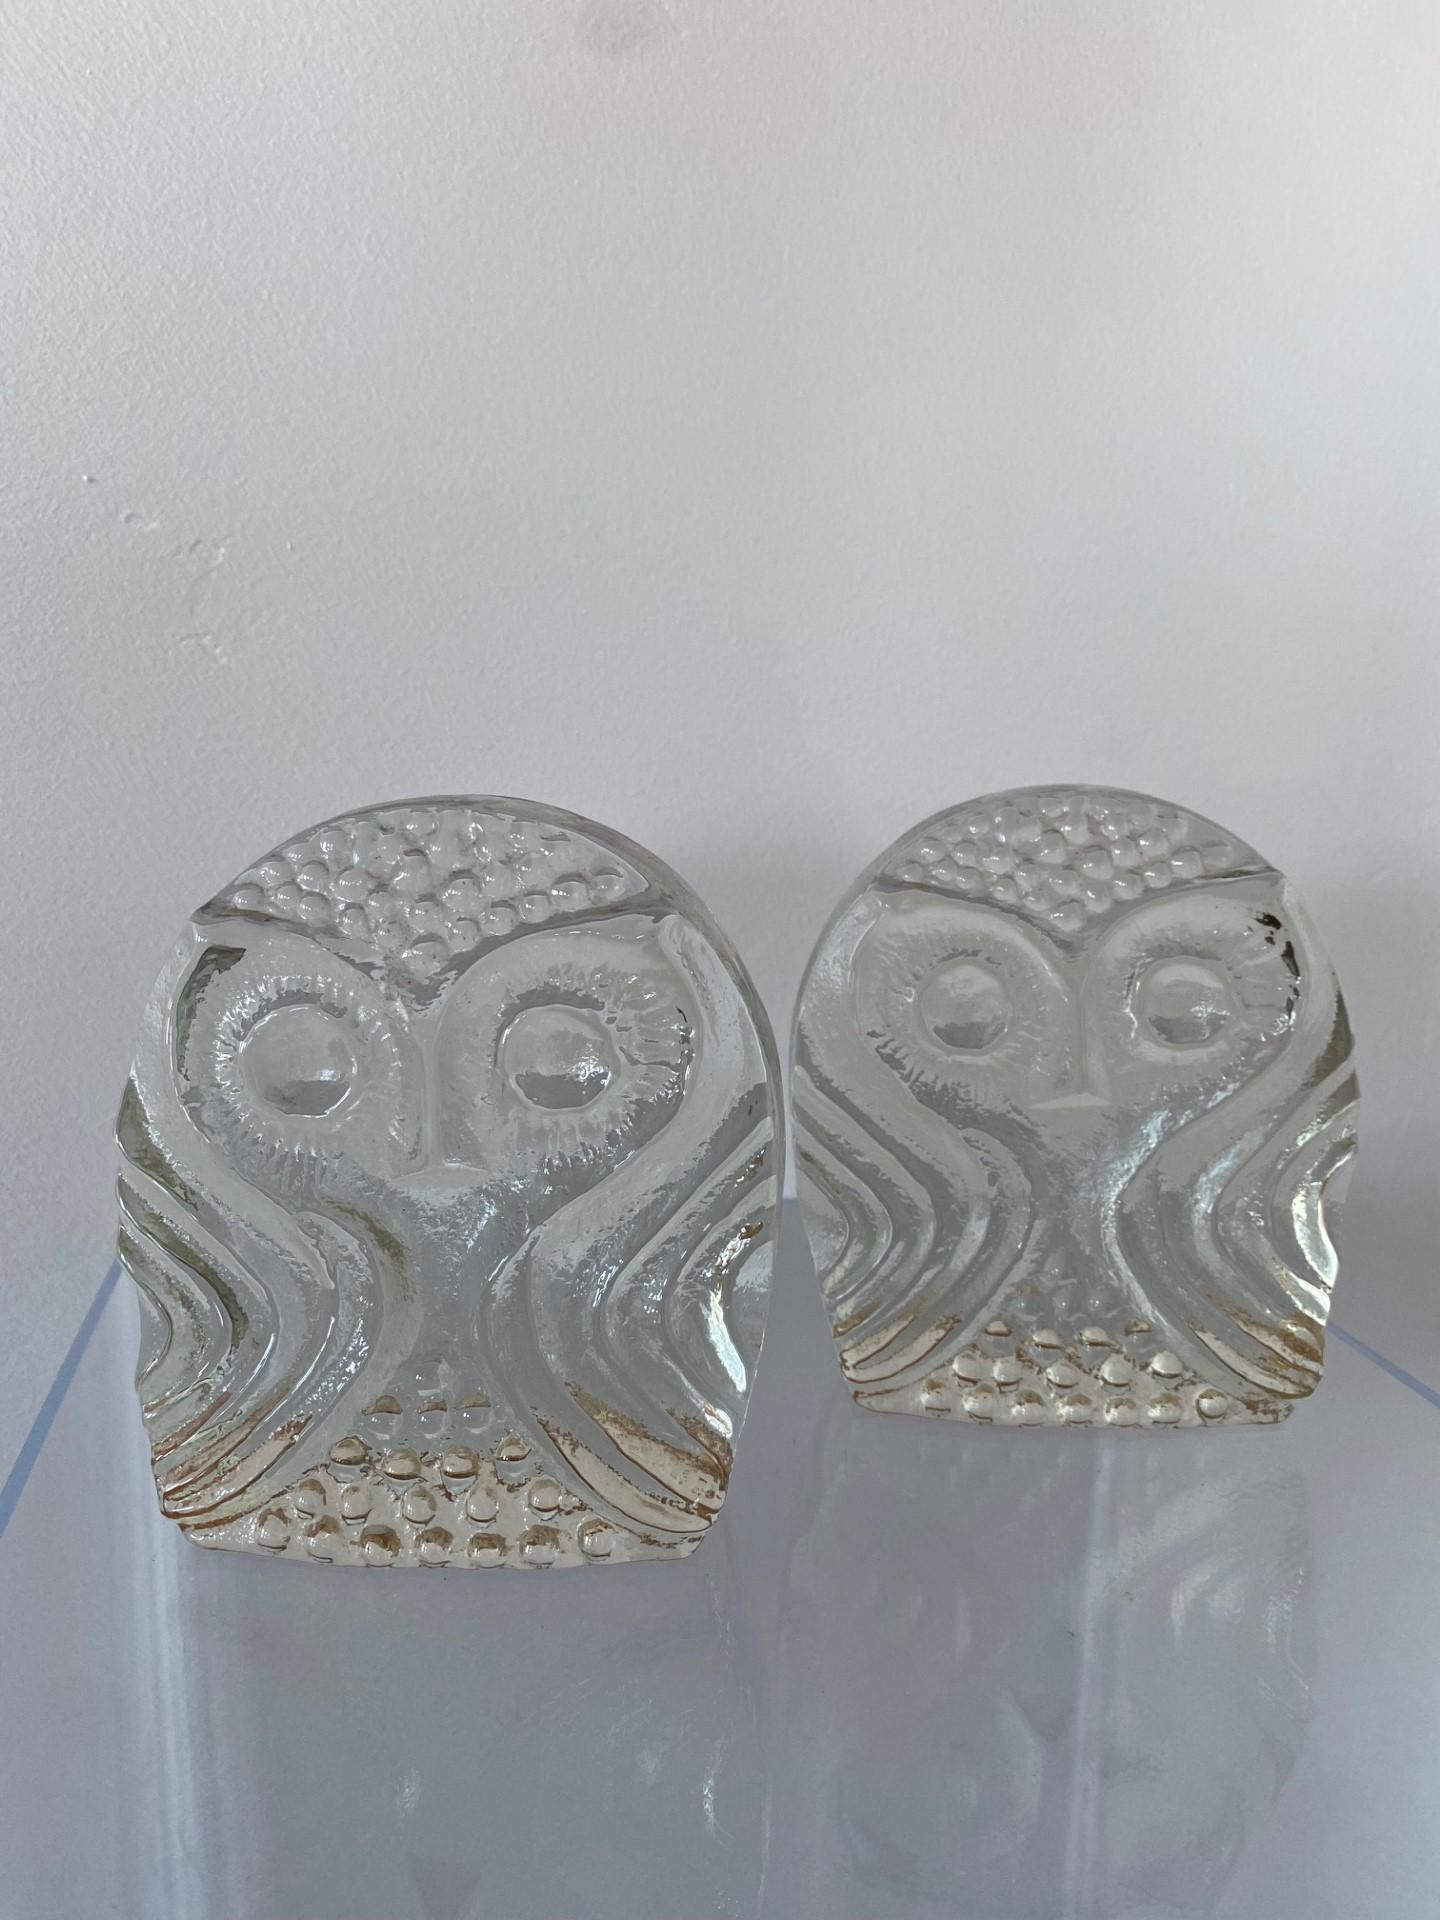 Beautiful pair of midcentury glass owl bookends by Blenko from the 1960s. Incredible craftsmanship and detail in this pair of glass bookends that can adapt to your style as sculptures or decorative objects. The shape and thickness of the pieces